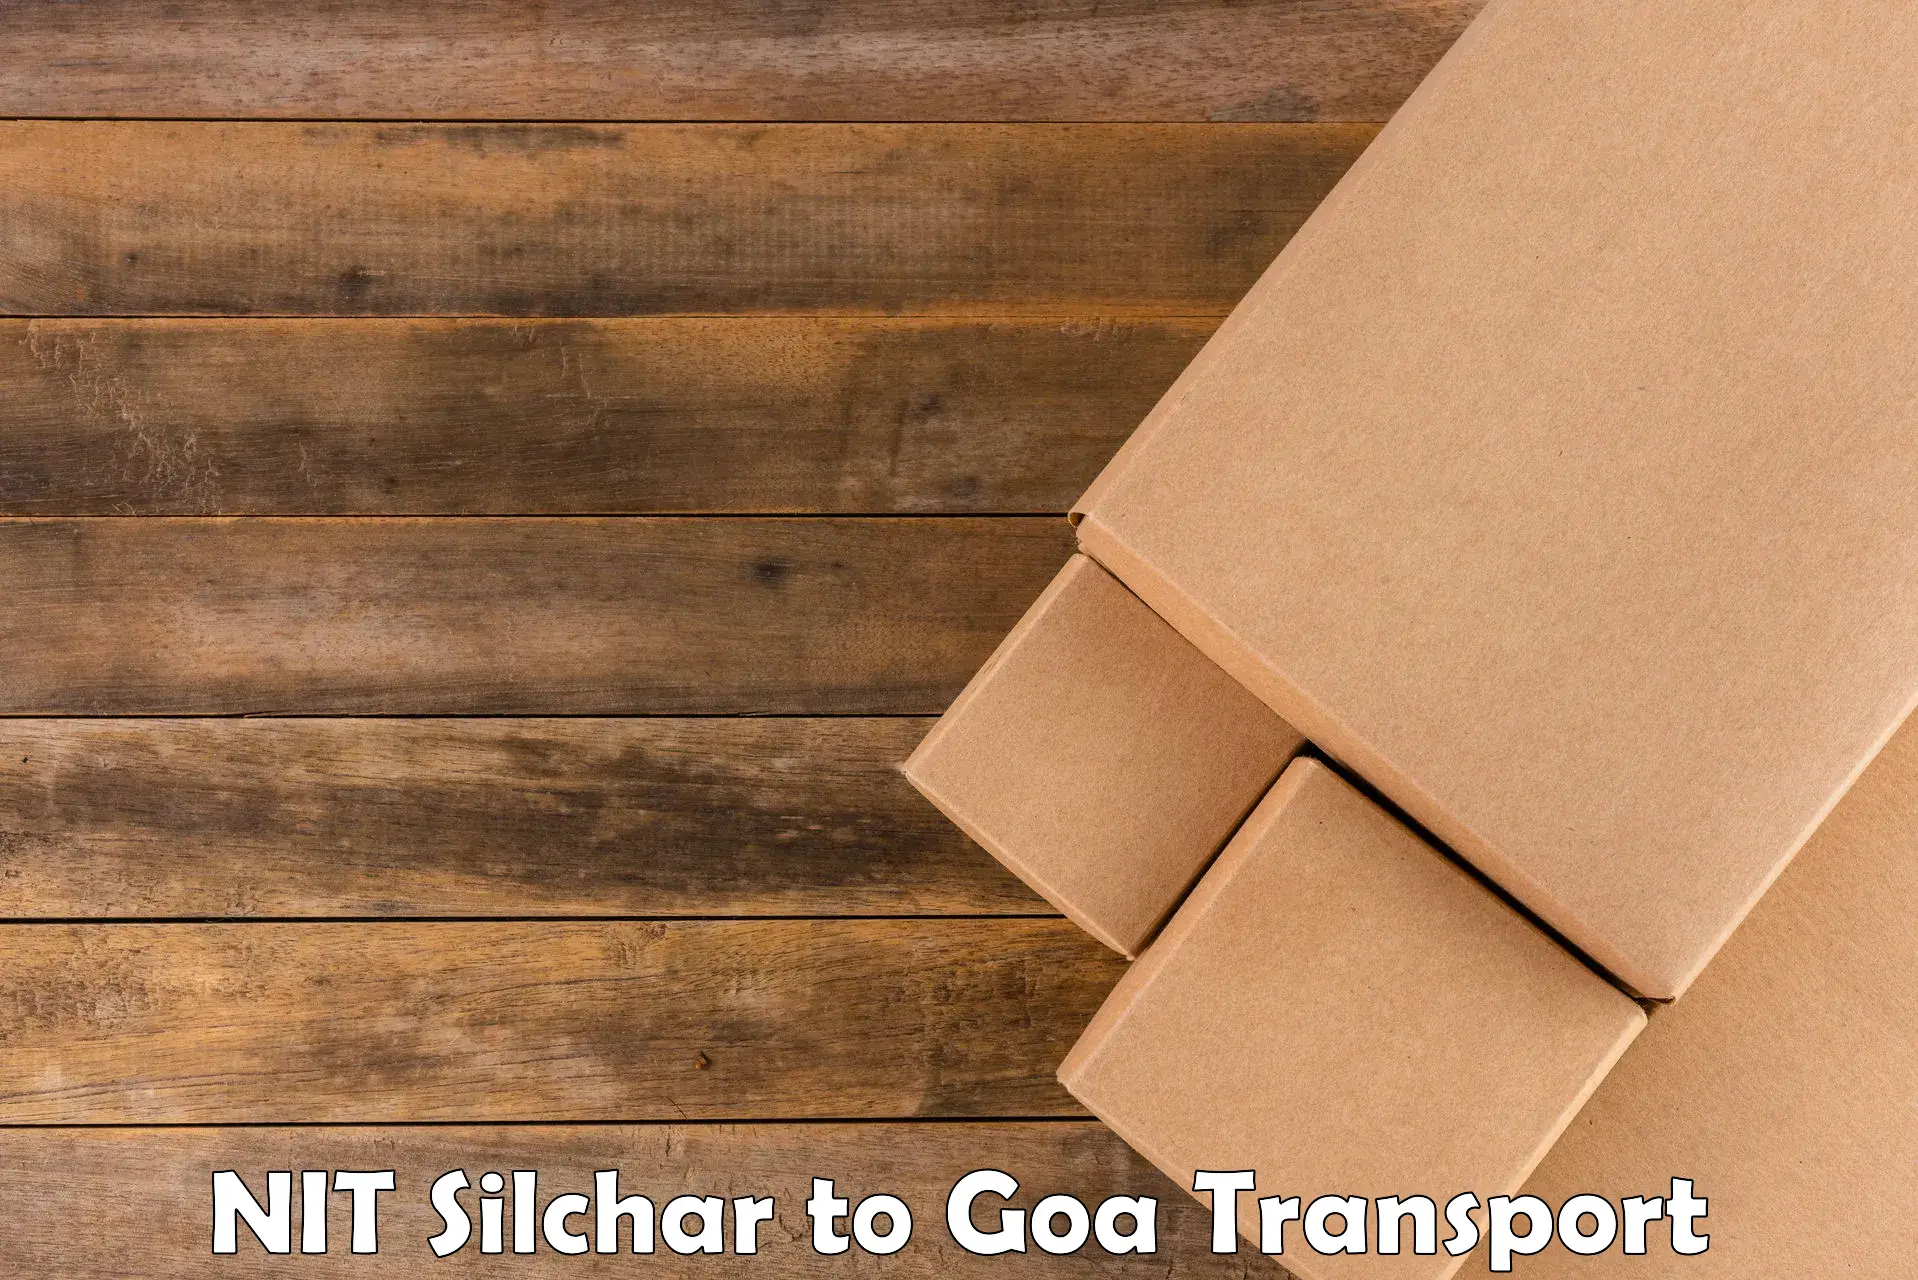 Vehicle transport services NIT Silchar to IIT Goa